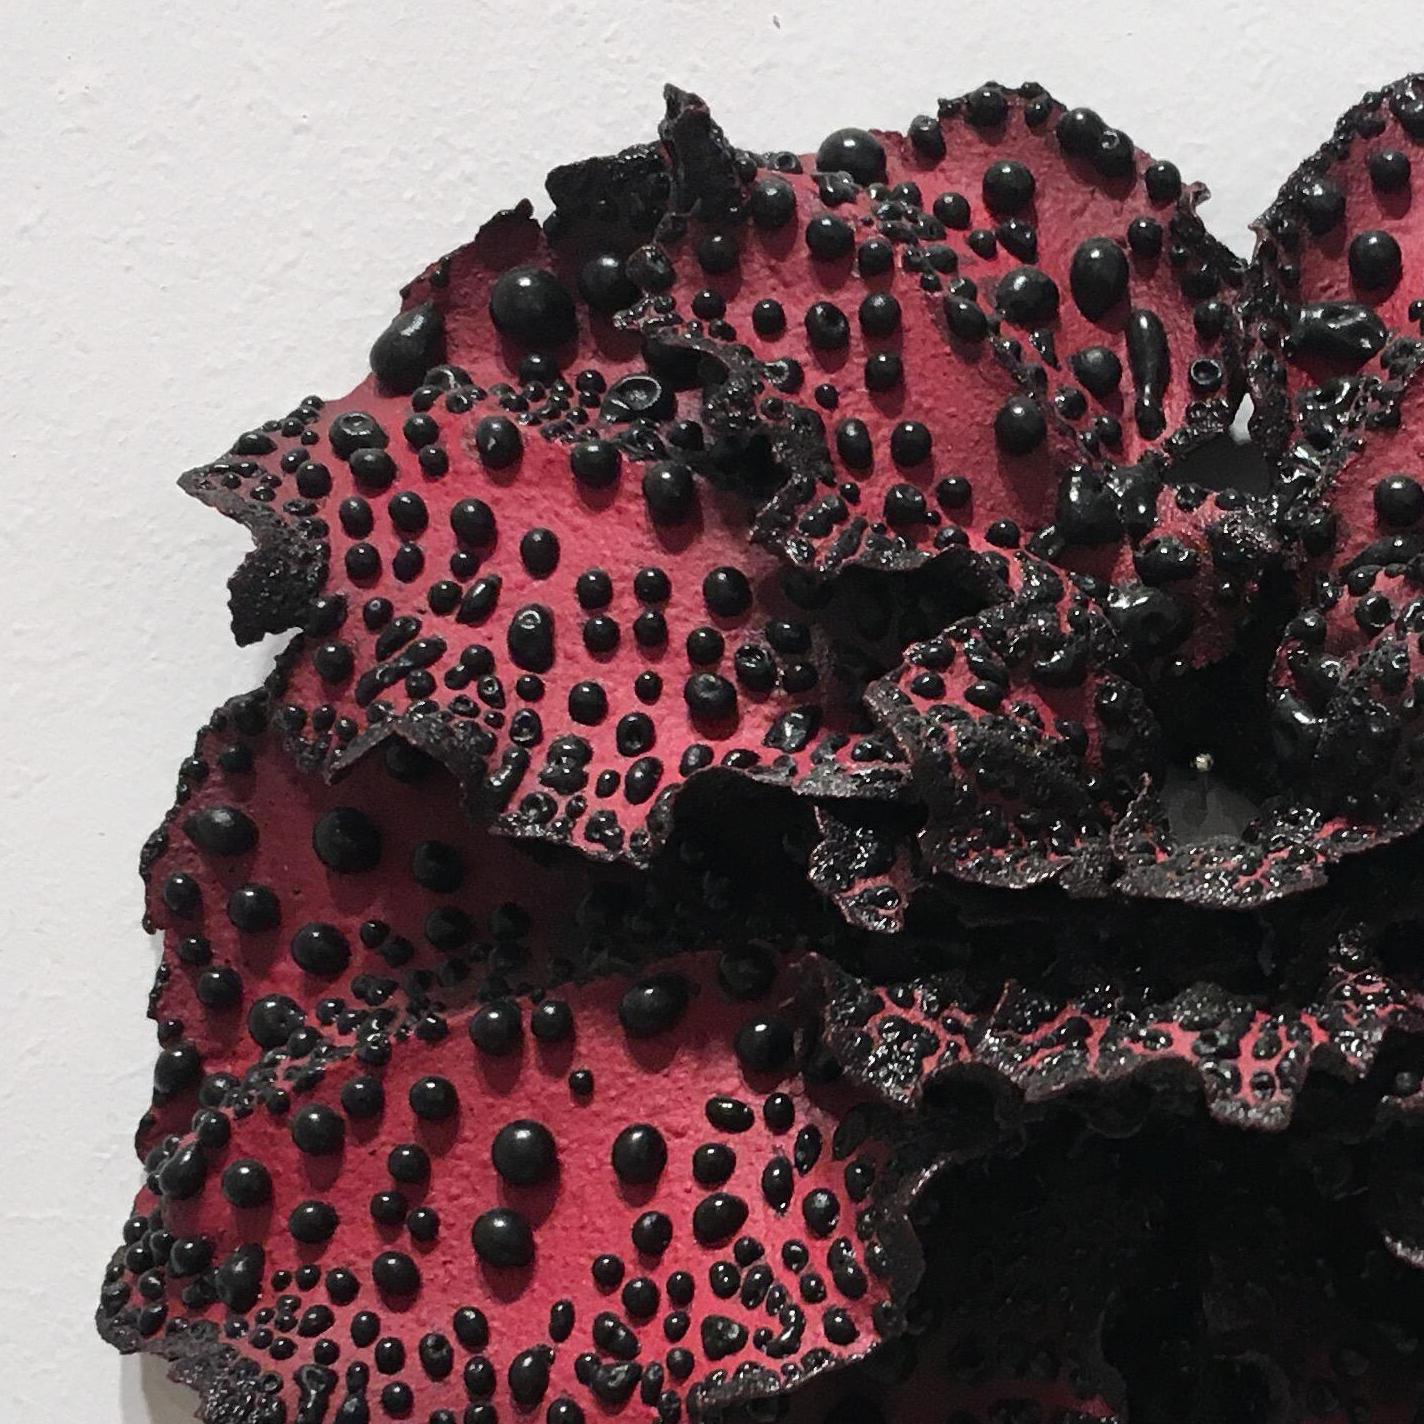 Untitled, red biomorphic flora-like ceramic sculpture, 2016 - Contemporary Sculpture by Christopher Adams